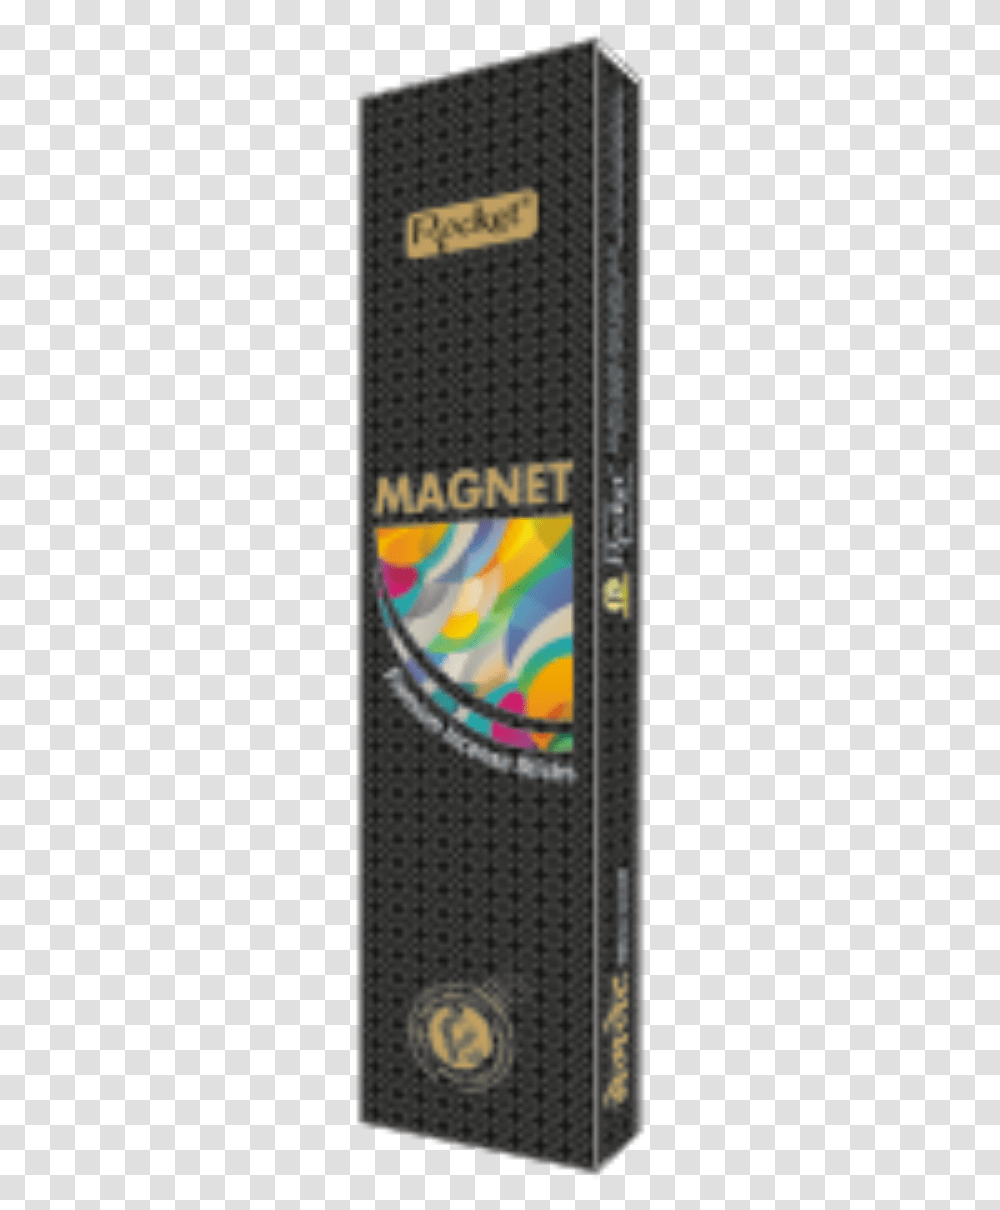 Magnet A Premiumbox Multimedia Software, Mobile Phone, Electronics, Cell Phone Transparent Png